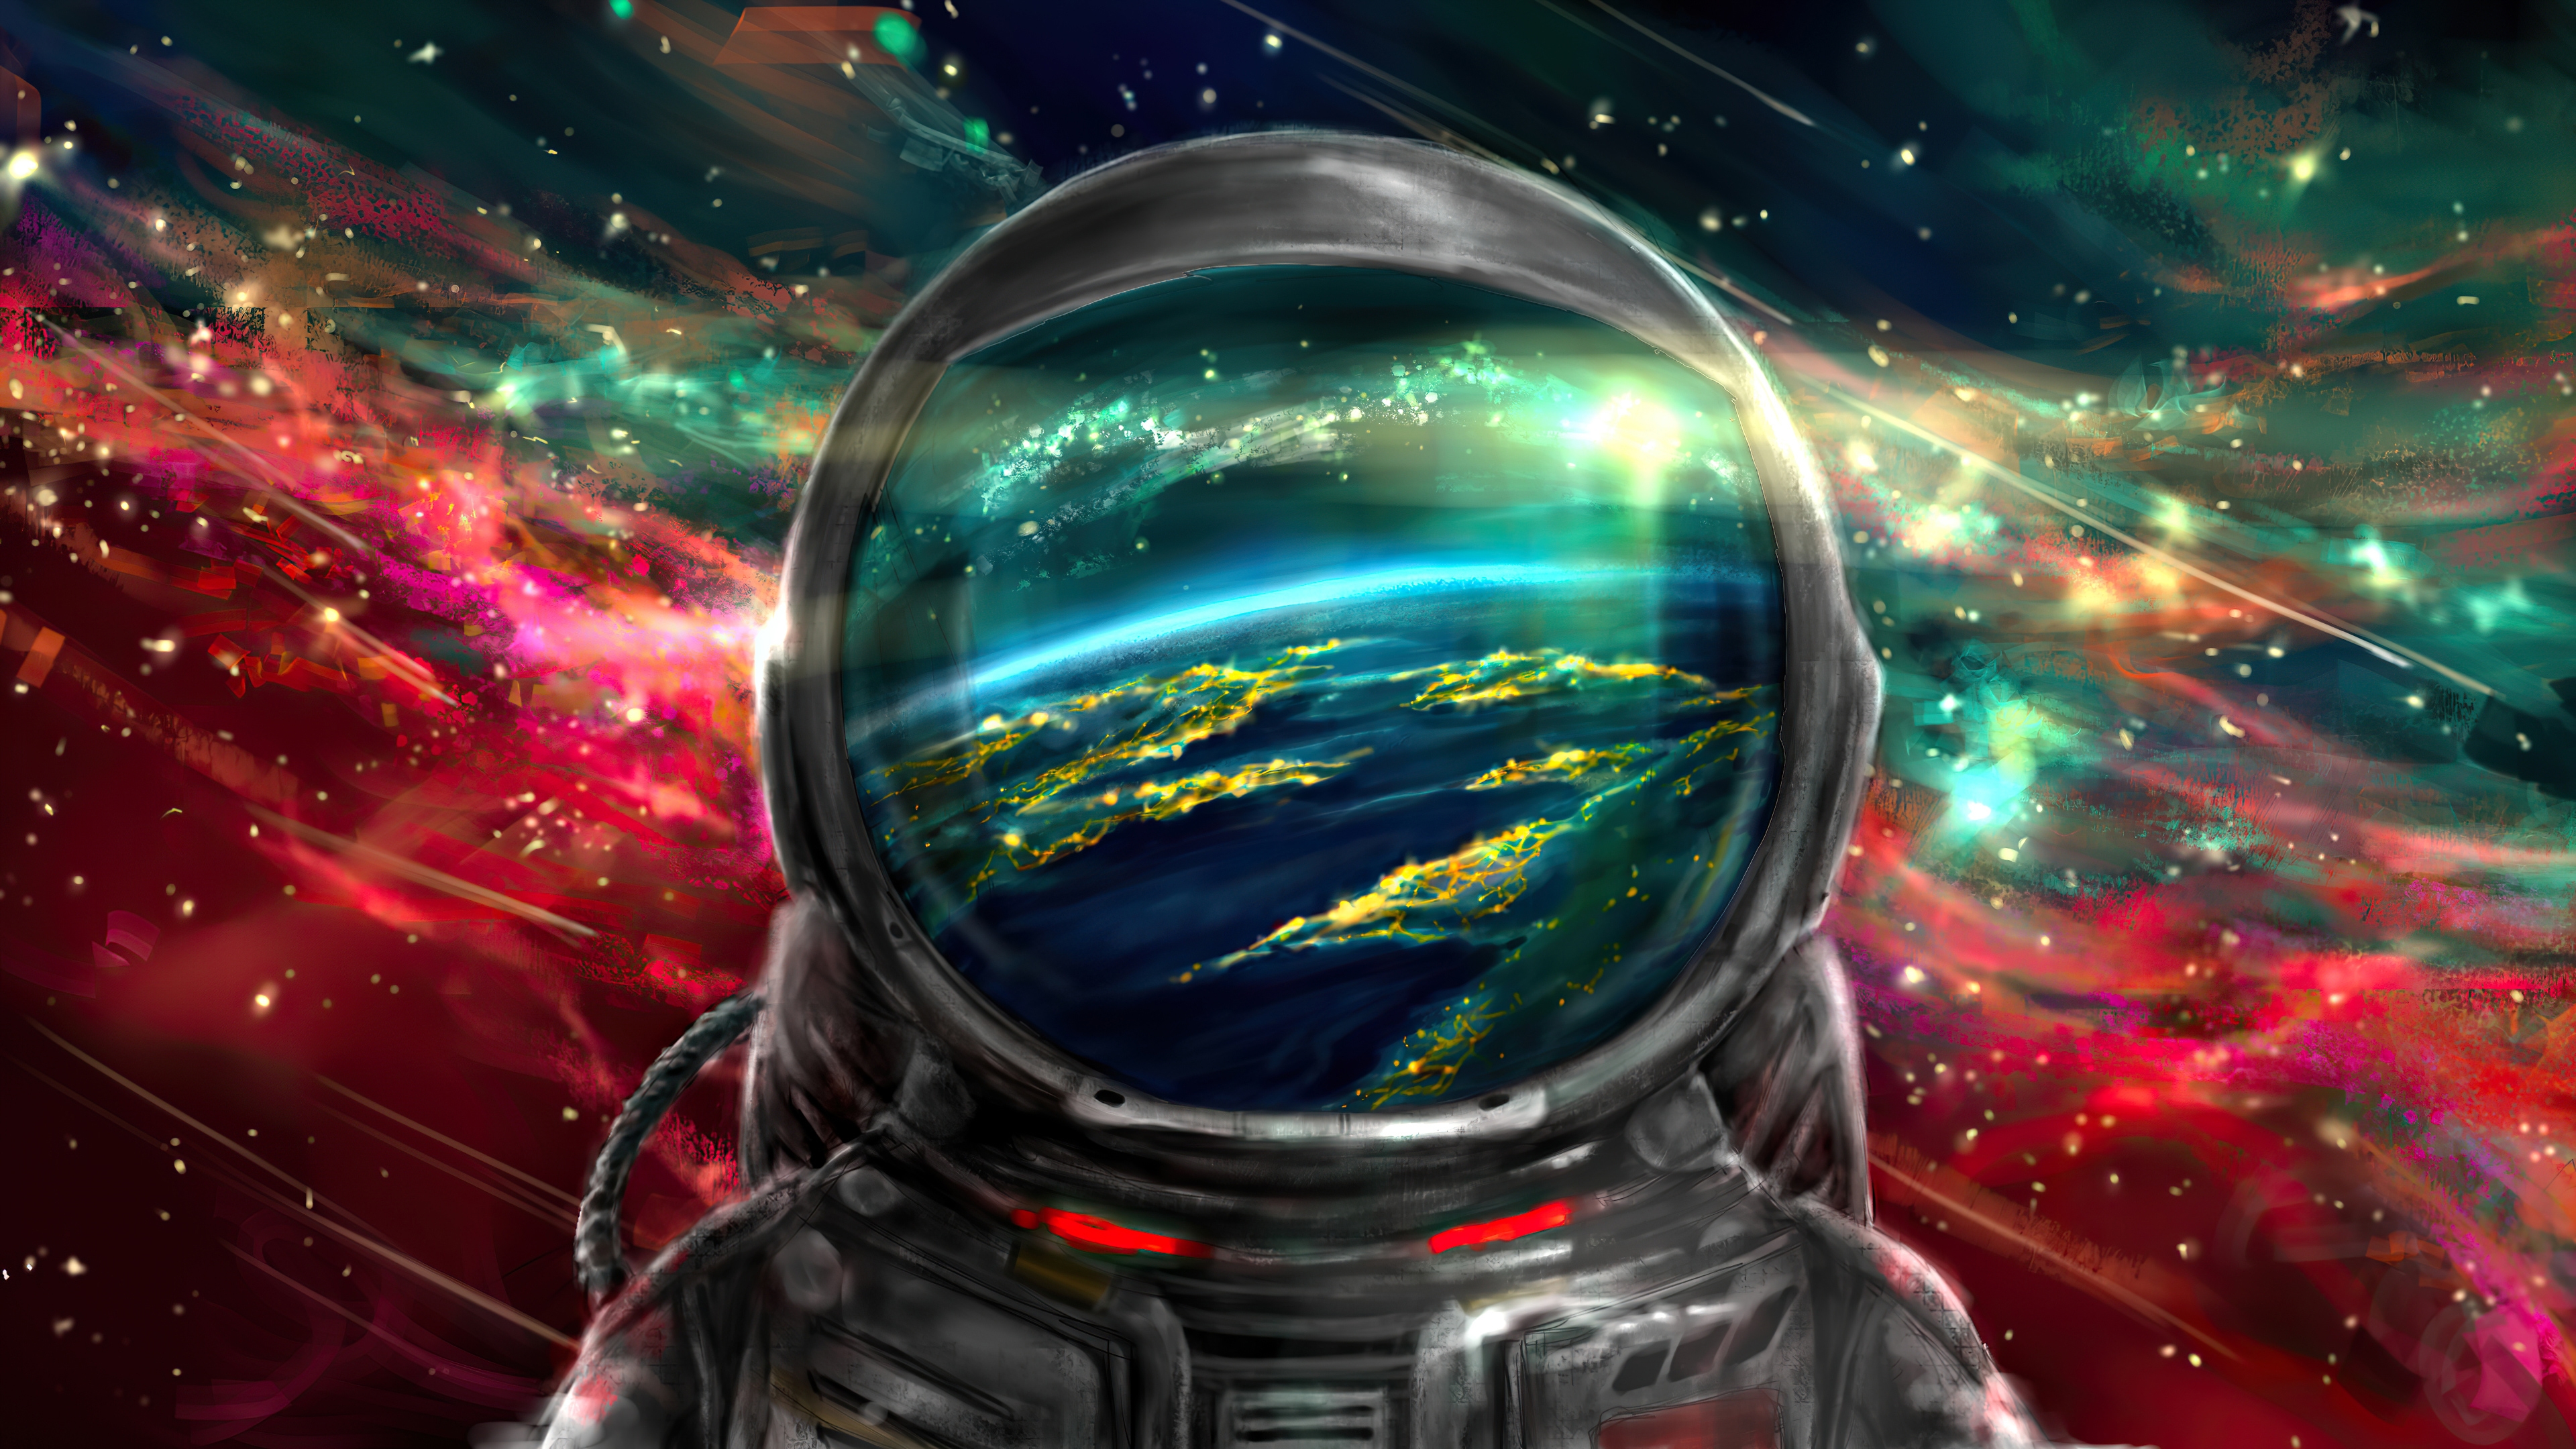 Download 3840x2160 Astronaut, Cosmos, Colorful Nebula, Galaxy, Reflection Wallpaper for UHD TV